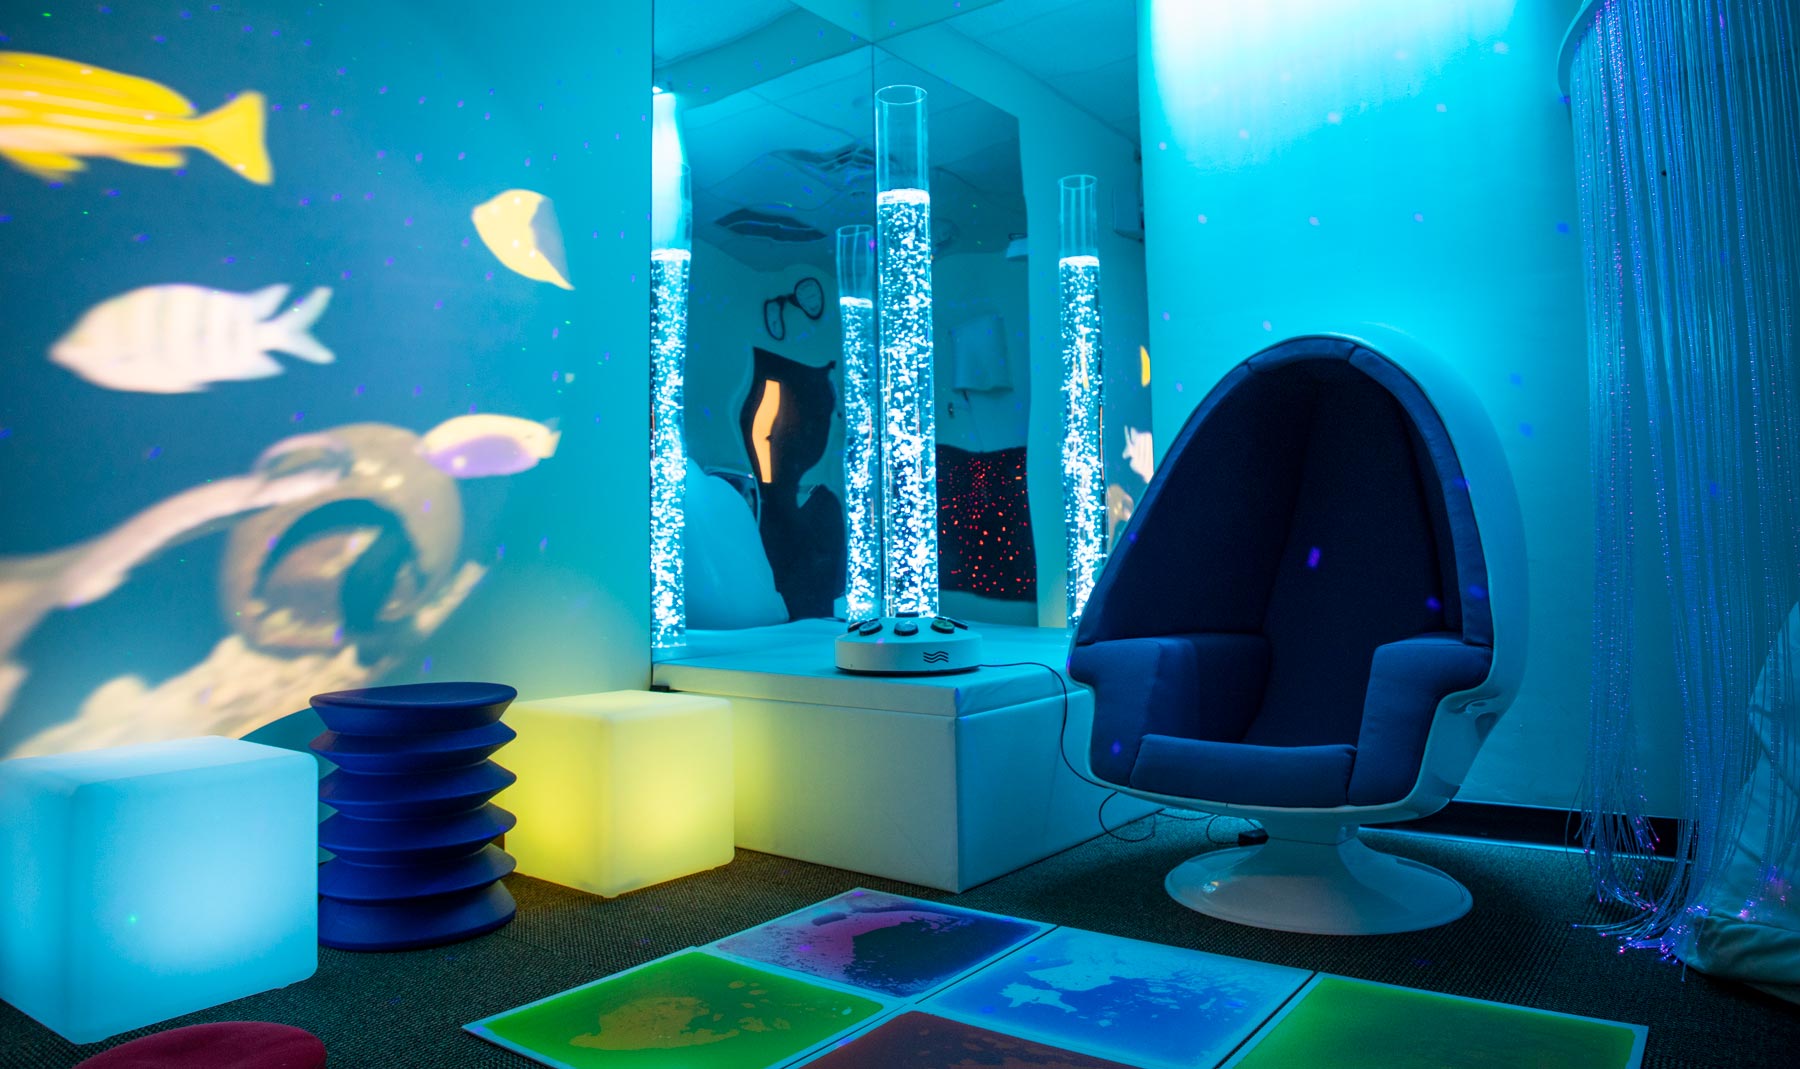 Multi-sensory room with egg chair and lots of different colored lights